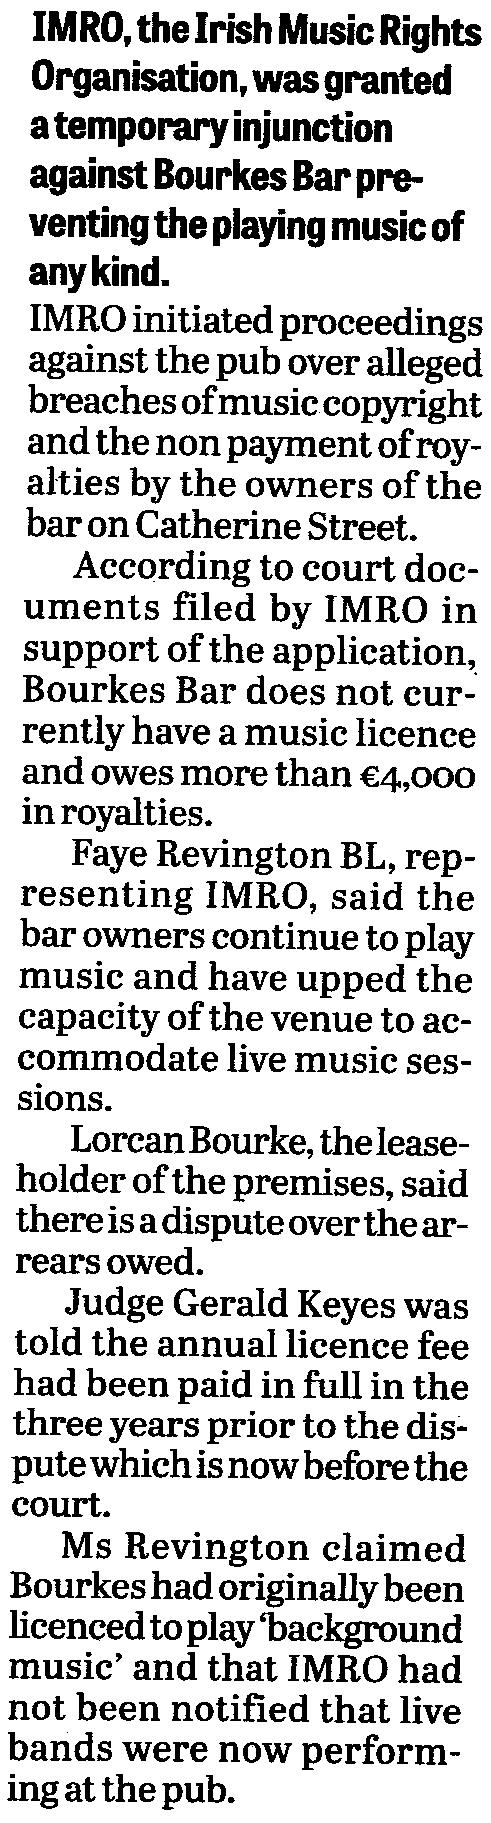 According to court documents filed by IMRO in support of the application, Bourkes Bar does not currently have a music licence and owes more